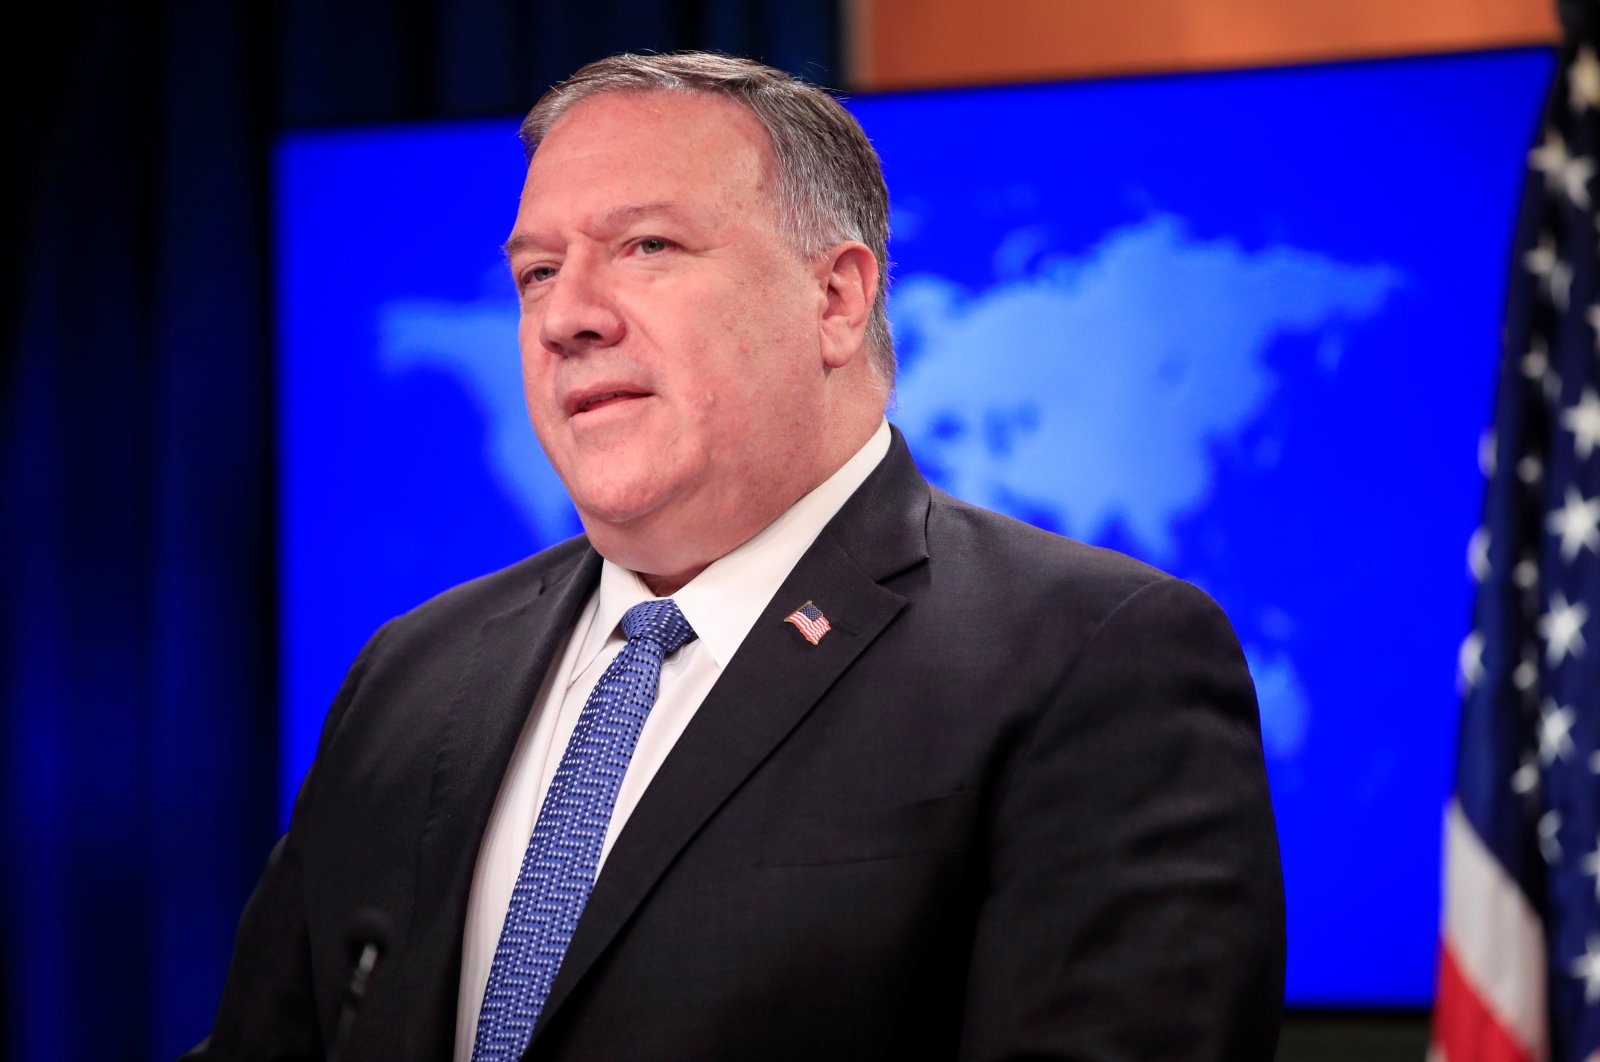 U.S. Secretary of State Mike Pompeo speaks during a news conference at the State Department in Washington, U.S. Aug. 5, 2020. (Reuters Photo)